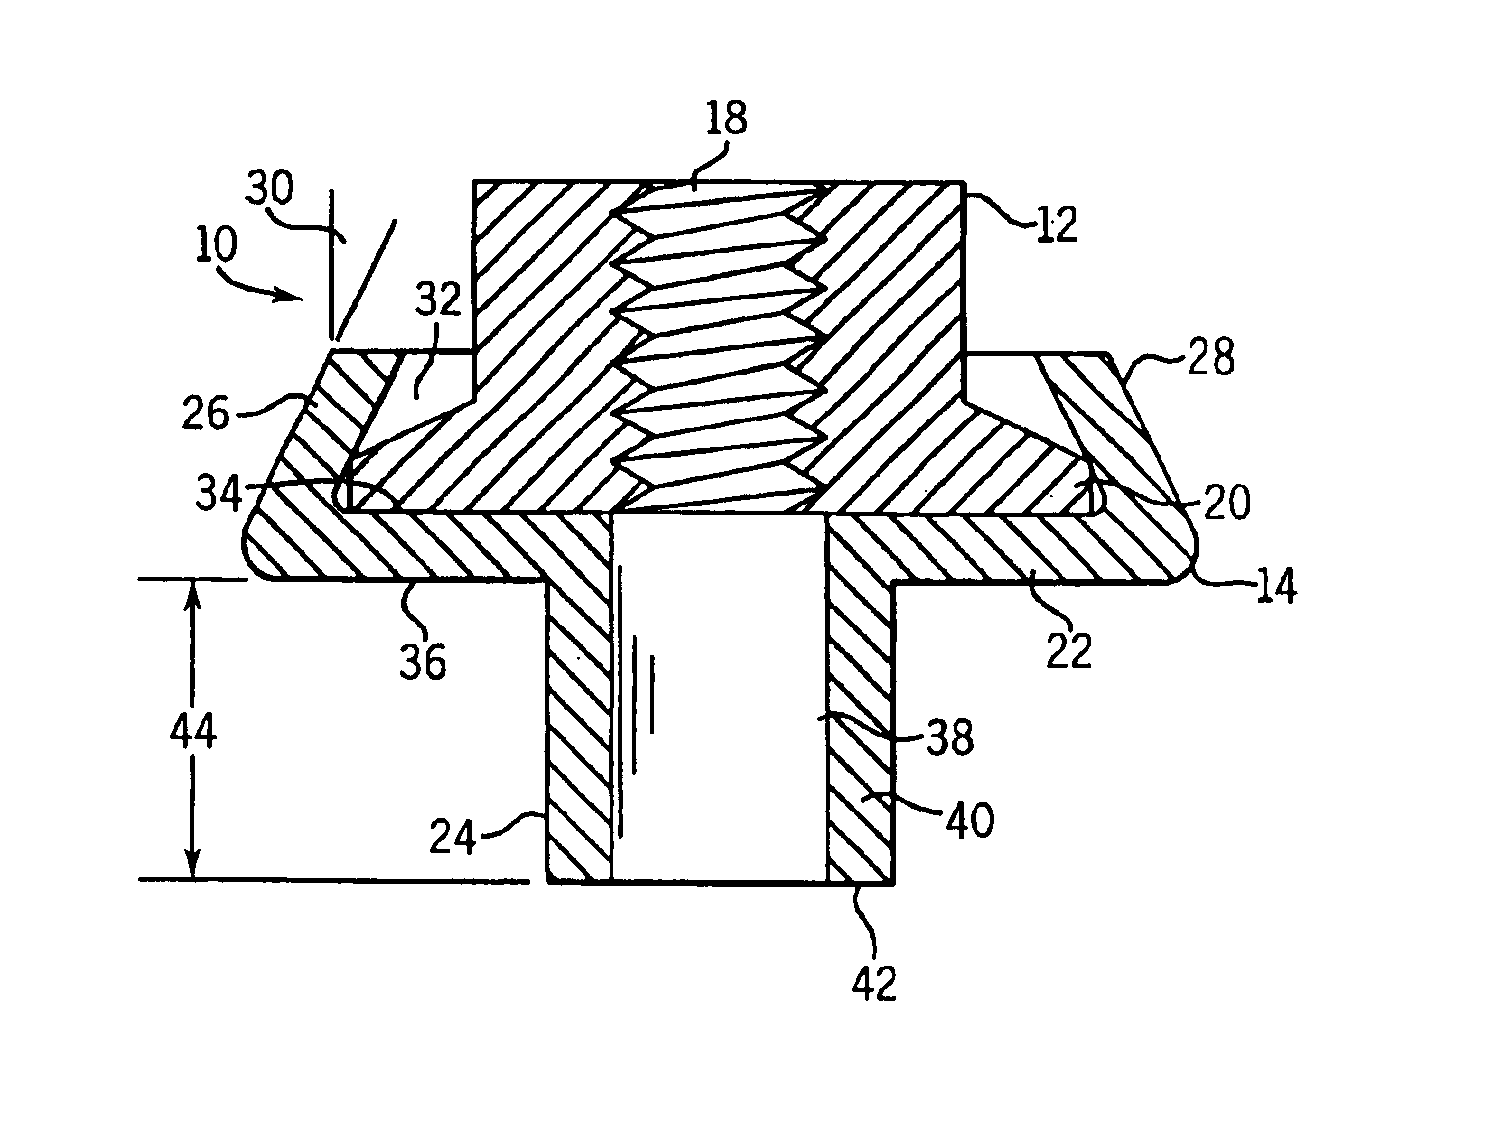 Internally threaded fastener and stemmed washer assembly and method for making same